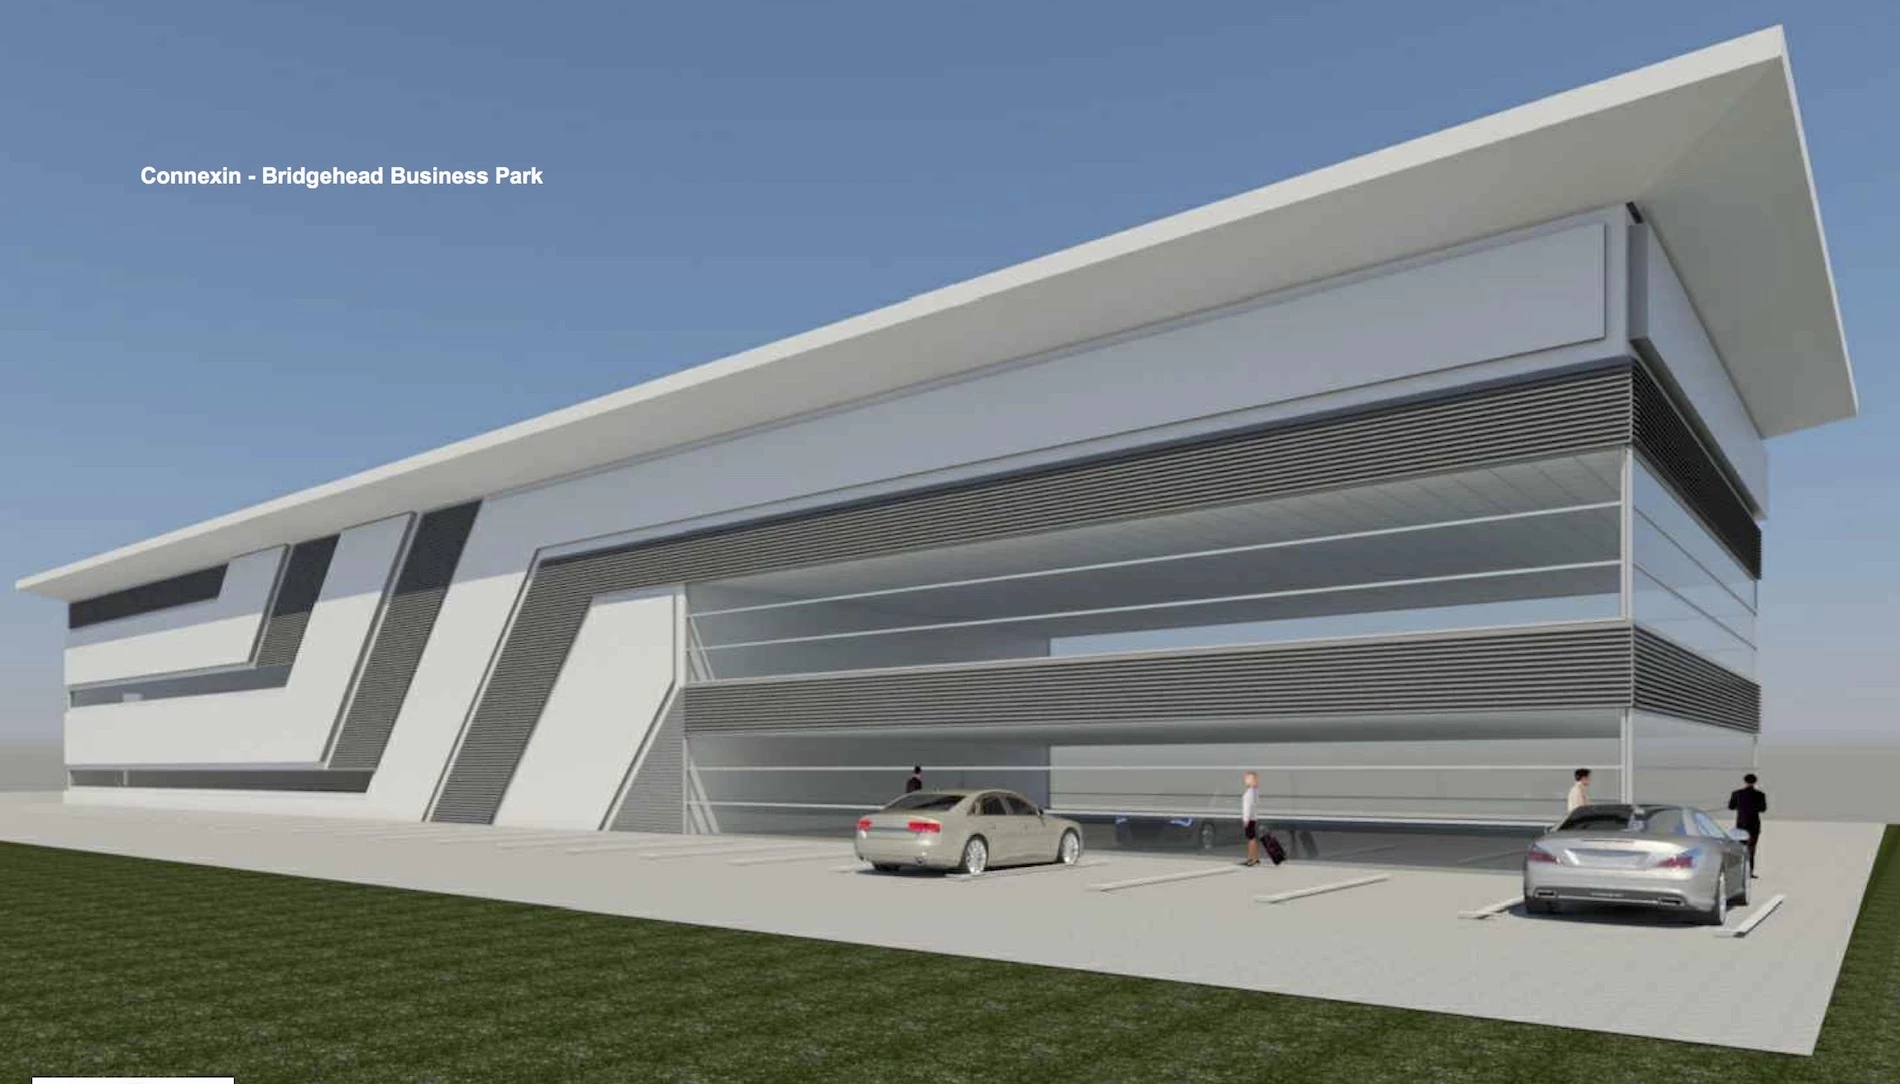 What the new data centre will look like